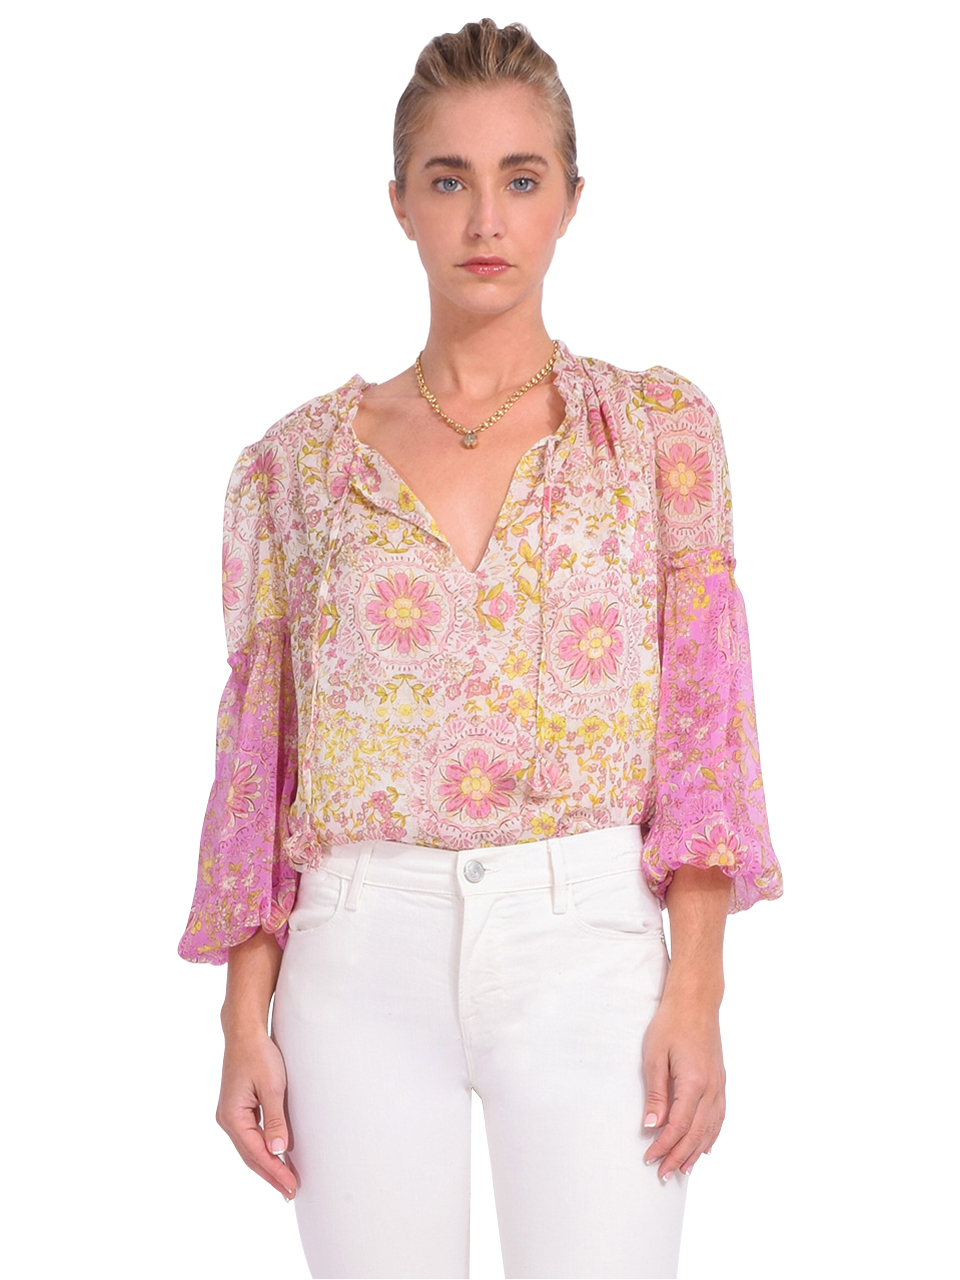 MISA Renata Top in Floral Medallion Mix Front View 